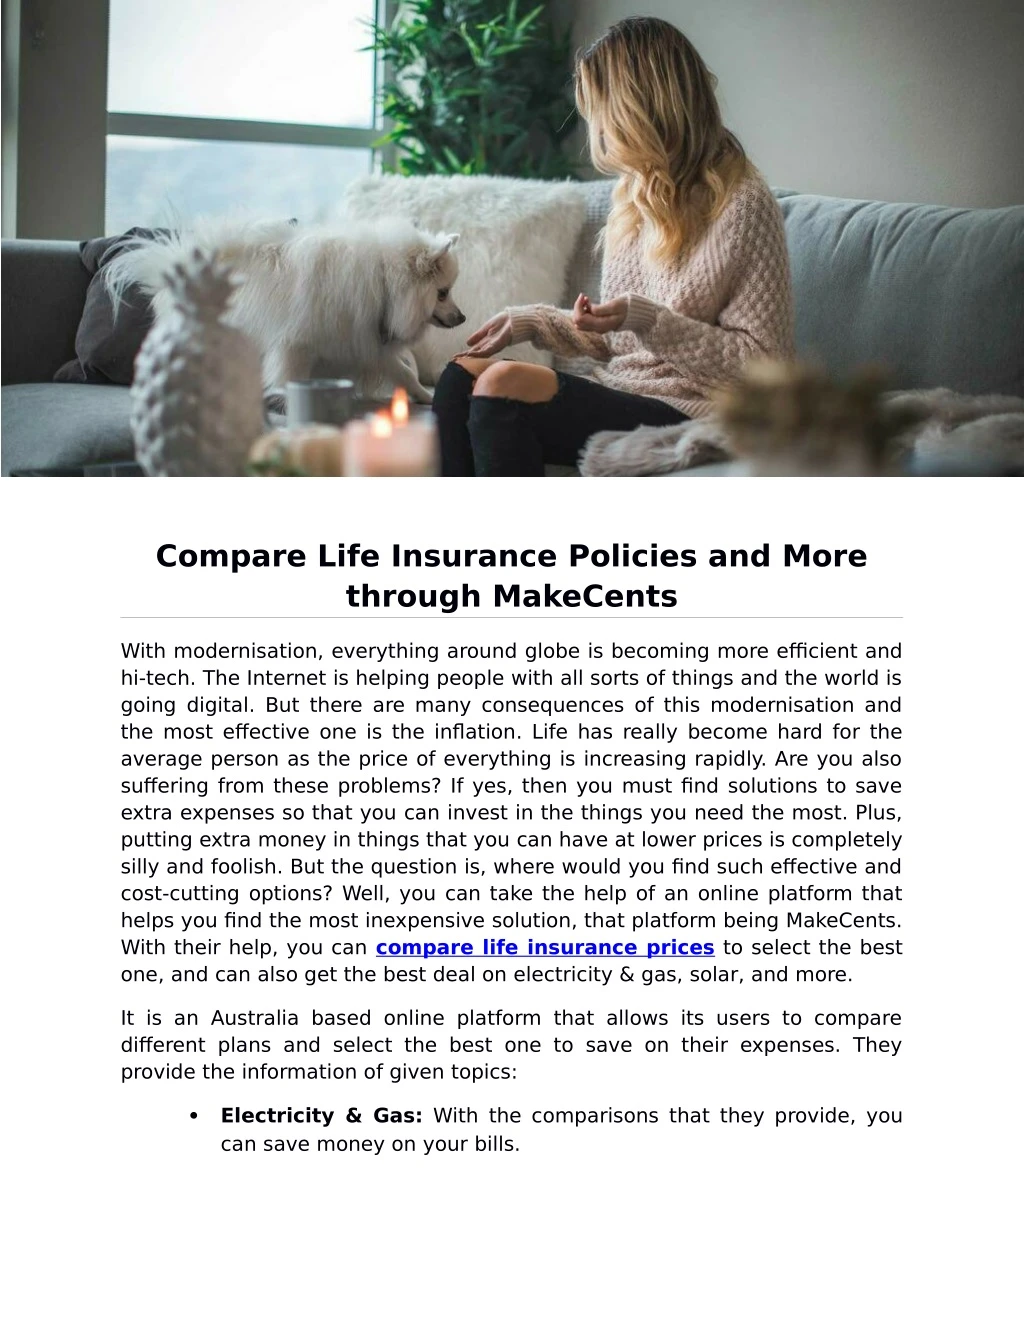 compare life insurance policies and more through